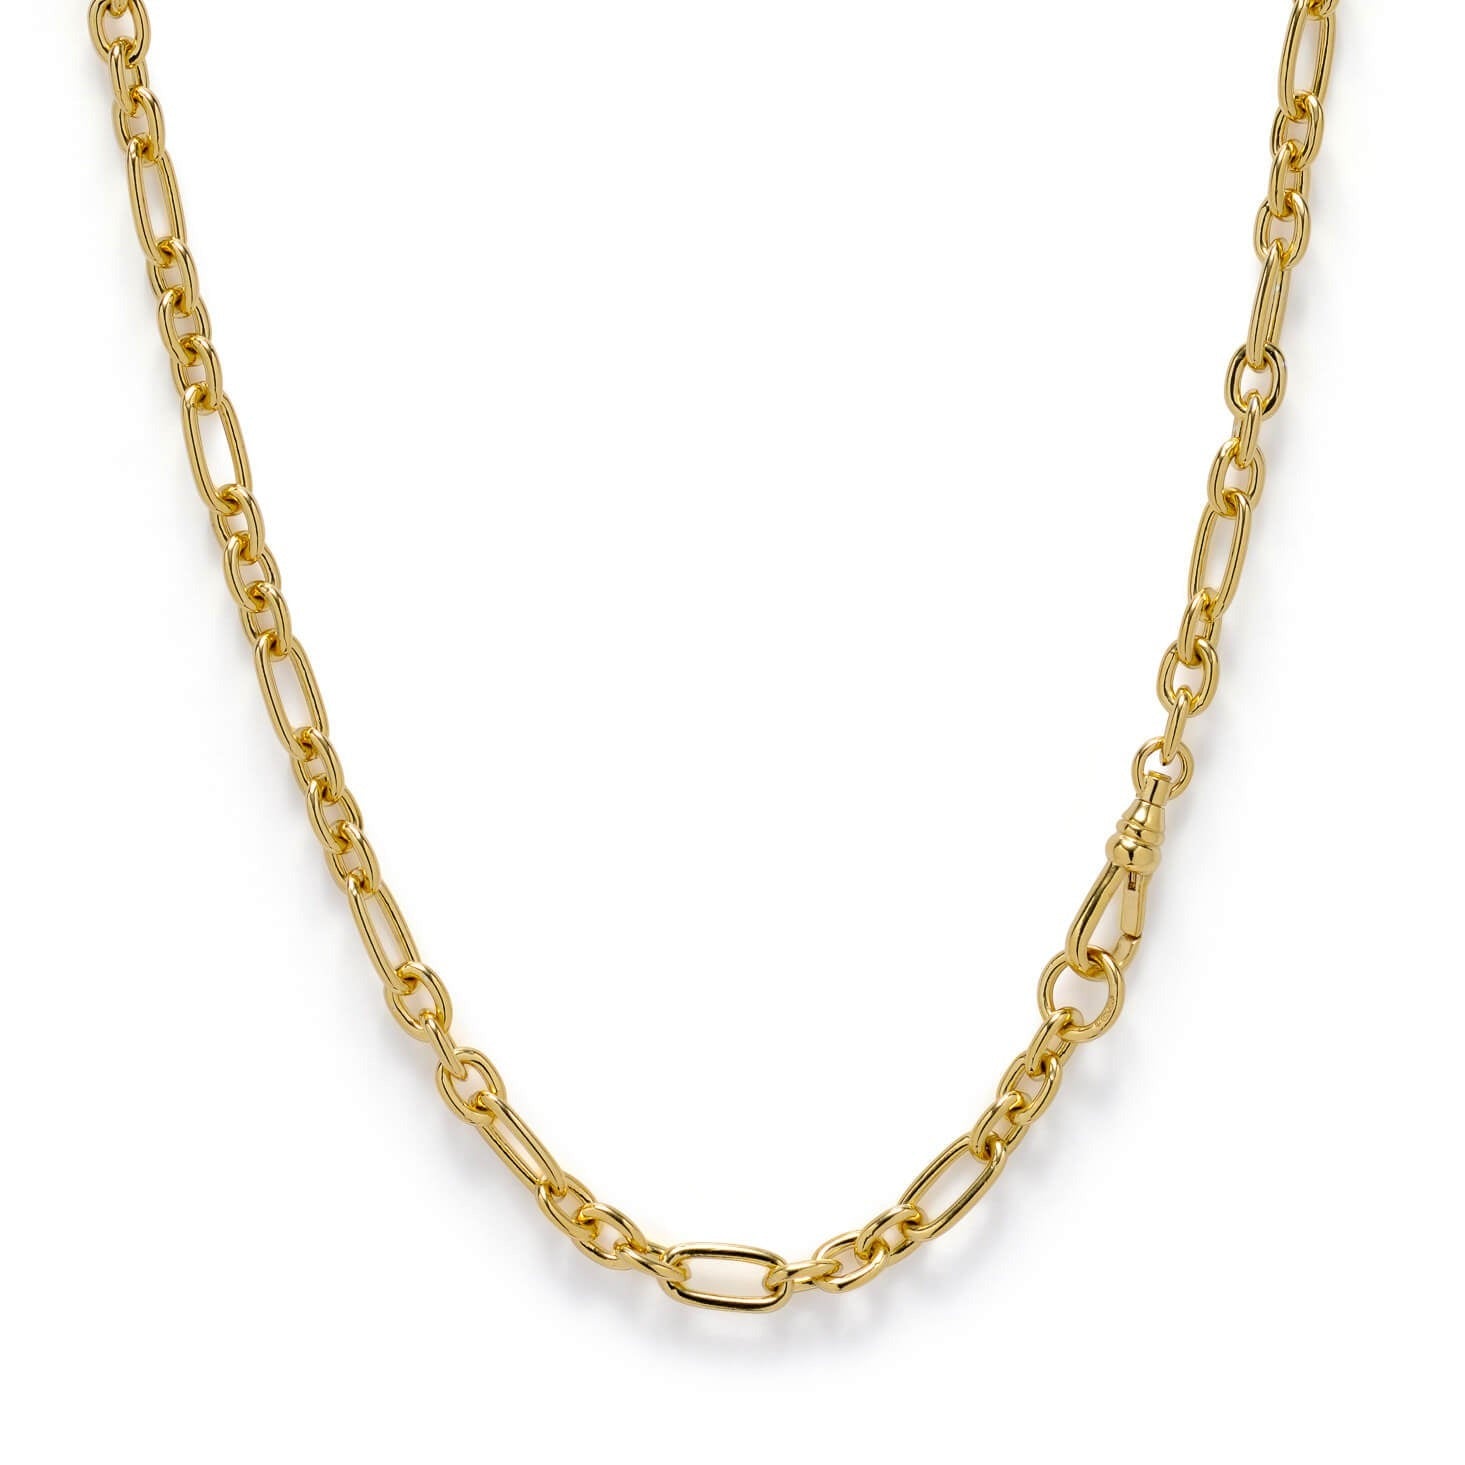 Gold Chain Necklace - Fetter (16", 18" or 20" available)